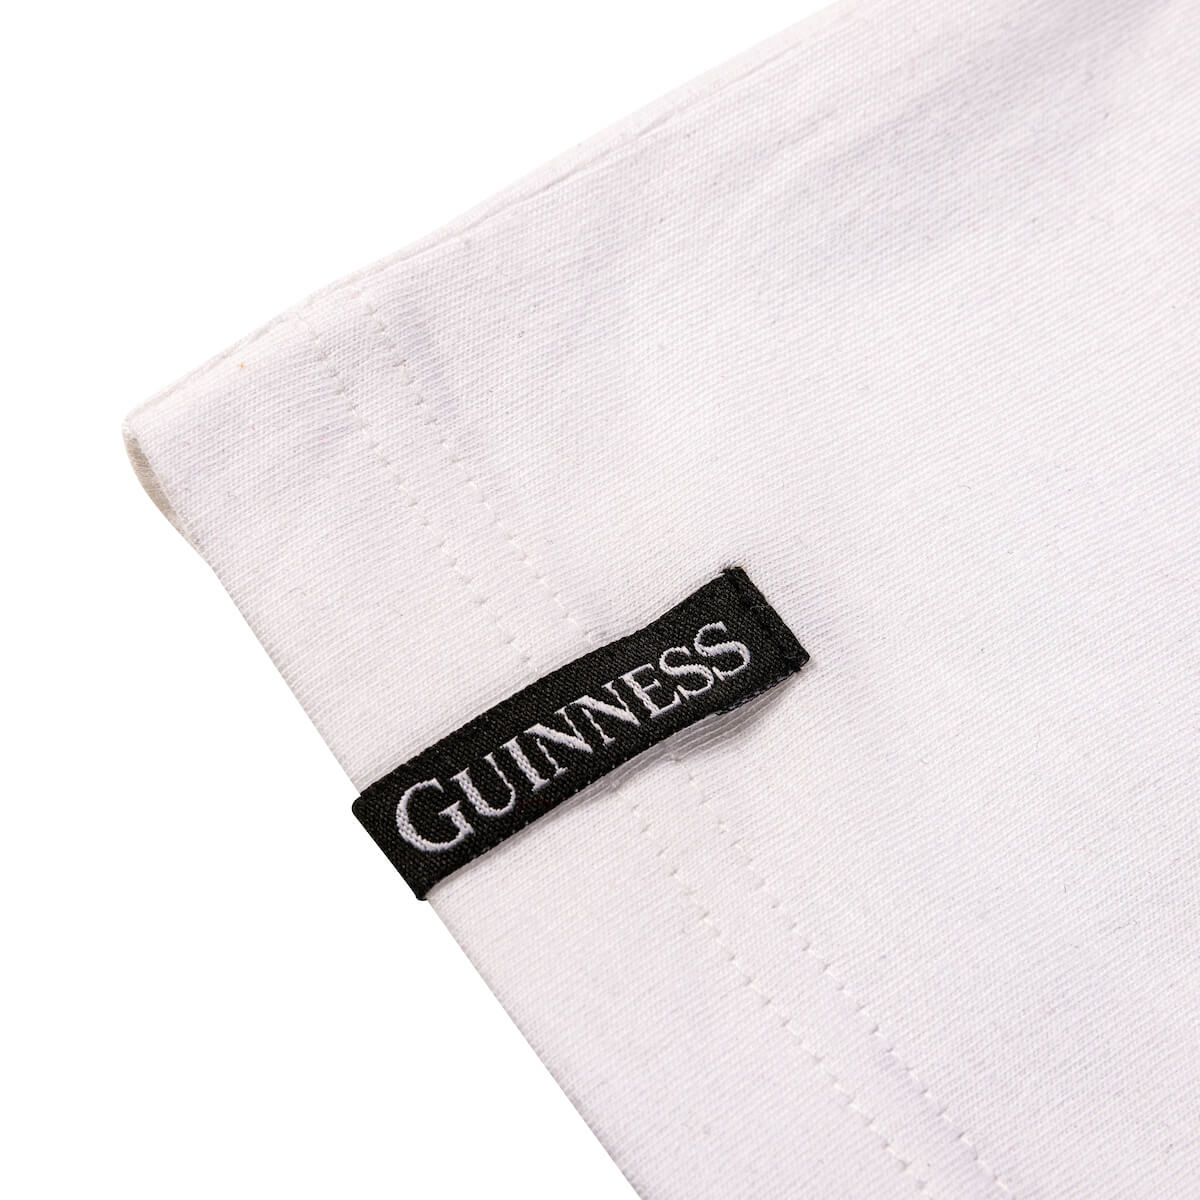 Guinness Storehouse Exclusive Better Cotton Initiative White T-Shirt